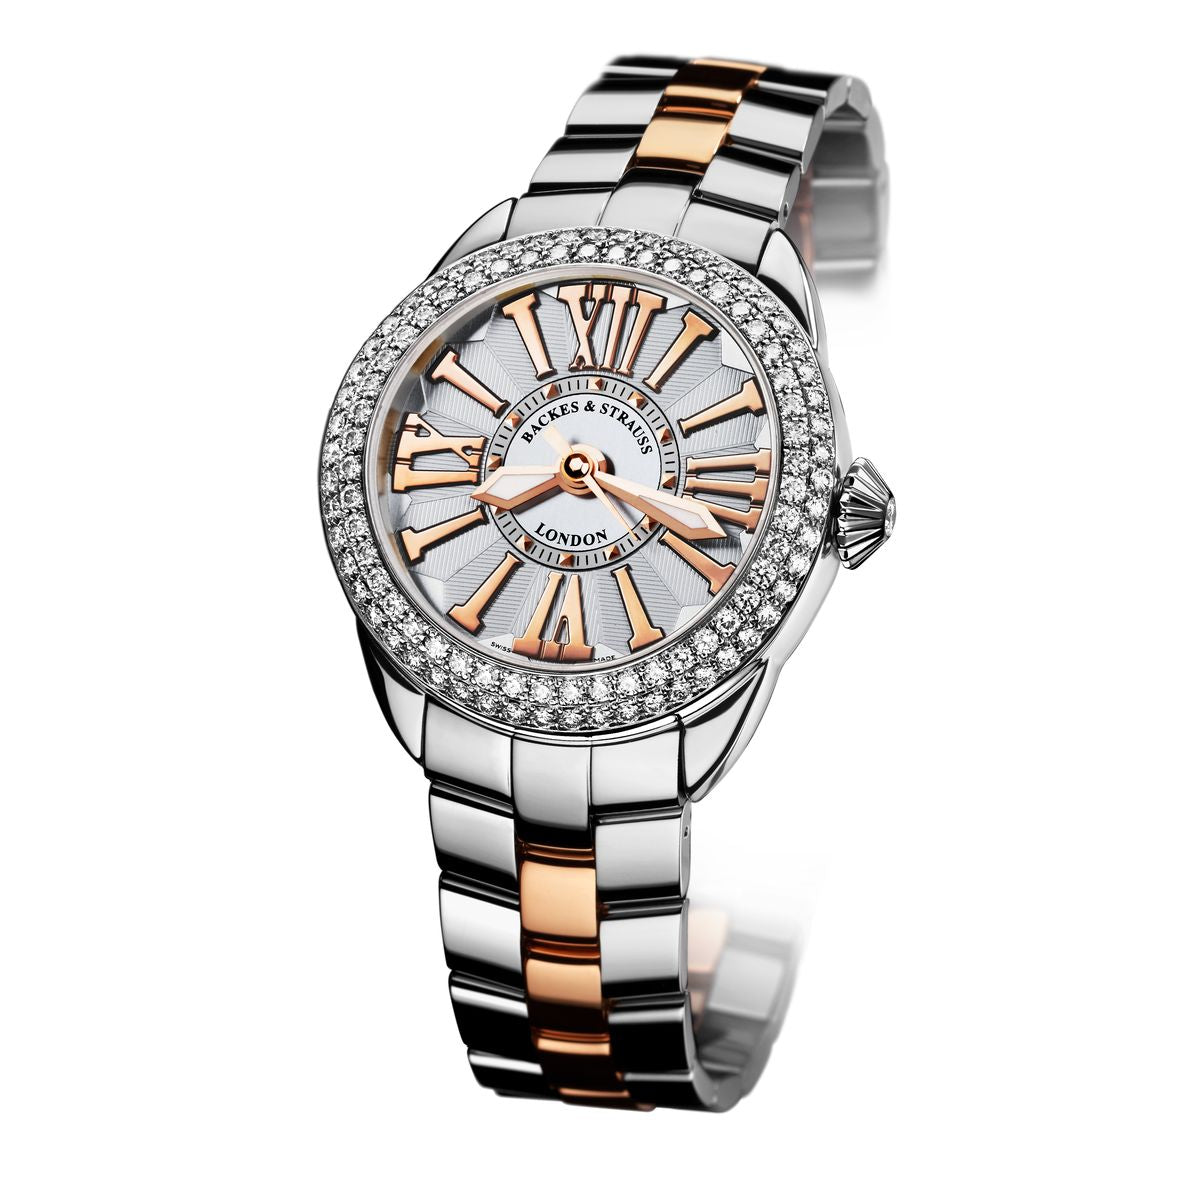 Piccadilly Steel 37 SP Luxury Diamond Watch for Women - 37 mm Stainless Steel - Backes & Strauss